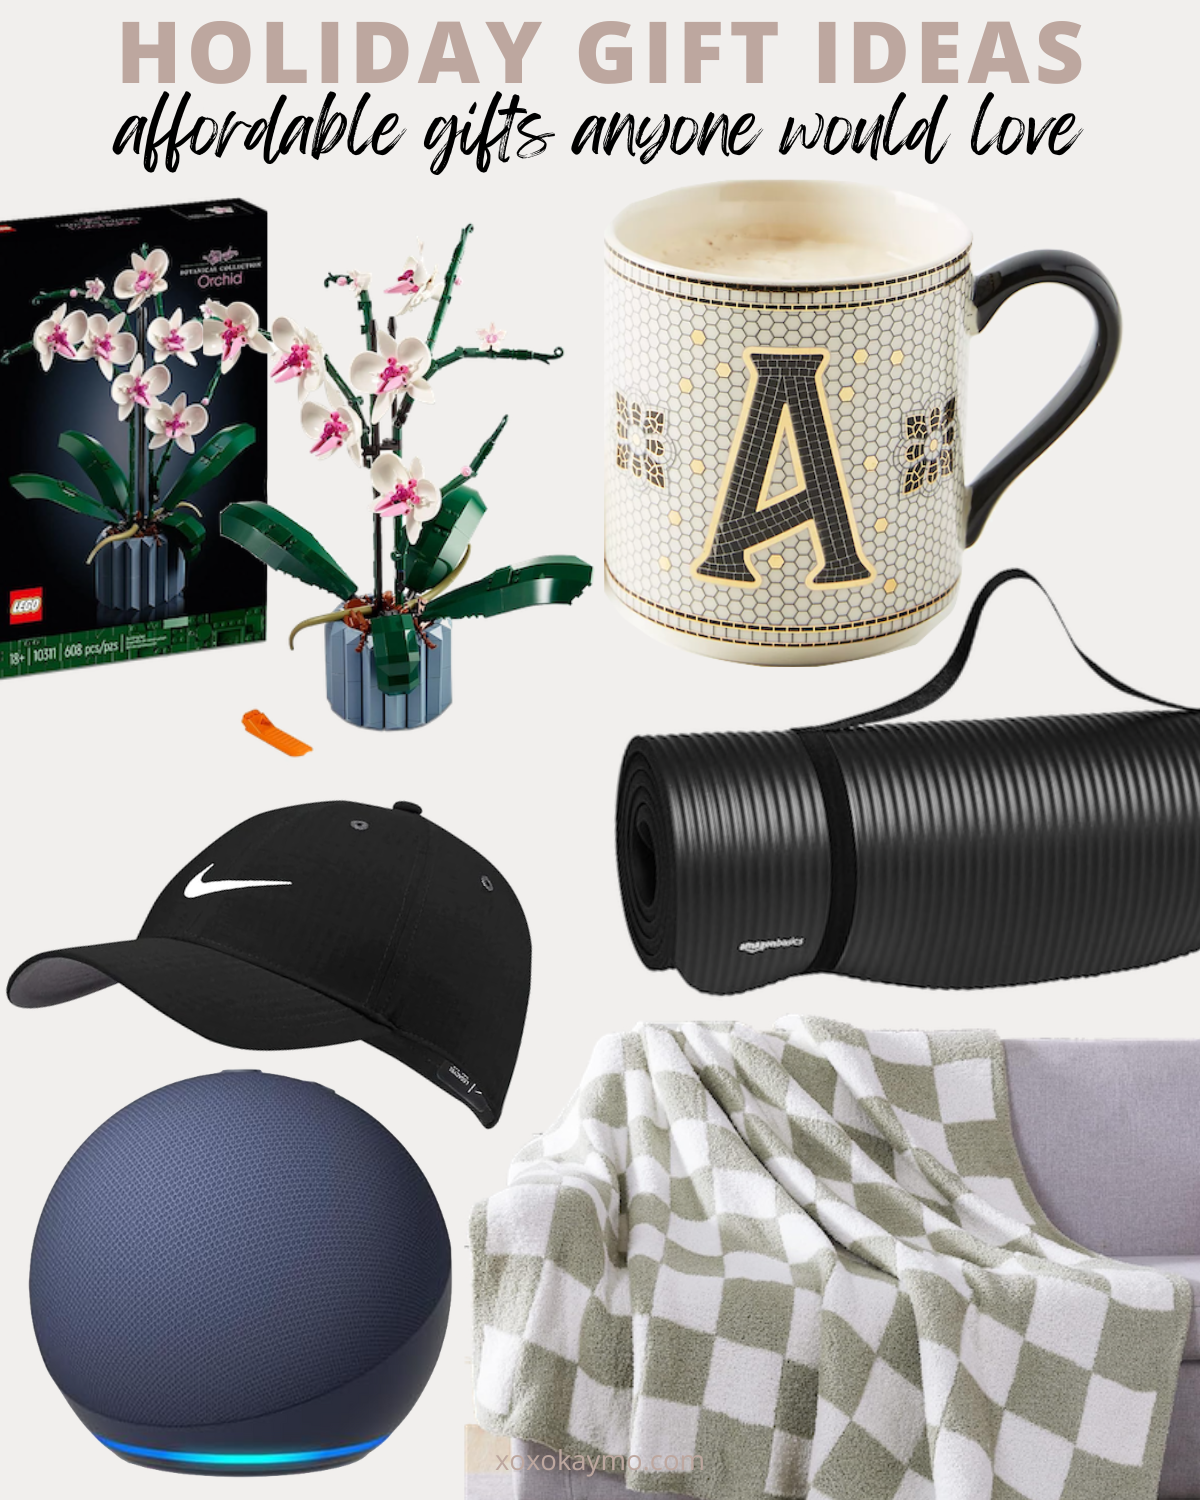 Affordable Gifts Everyone Will Love